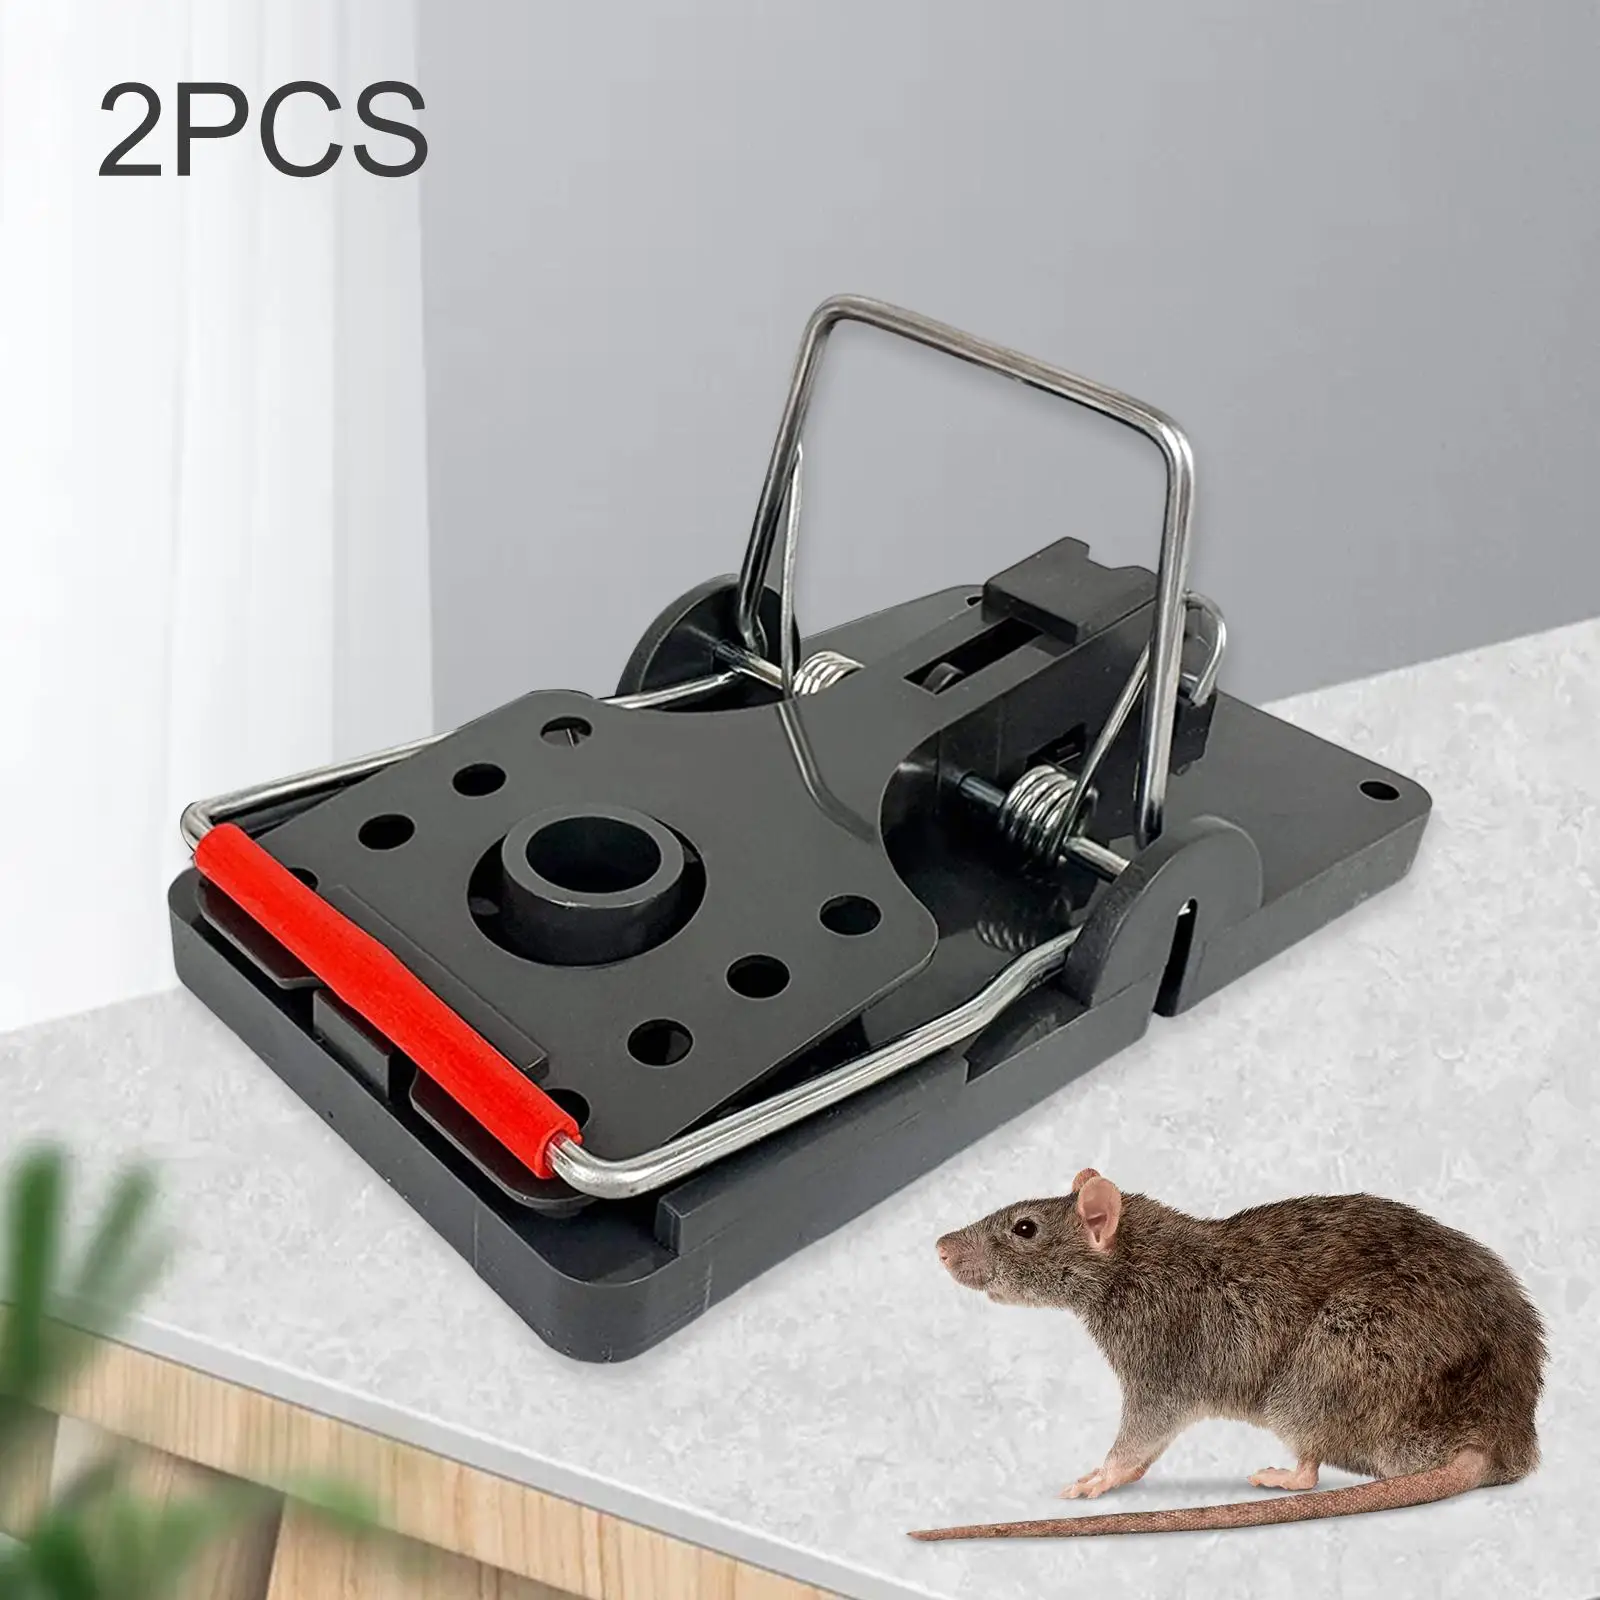 Humane Mouse Traps for Indoor, Home & Outdoor - Pack of 2 Reusable, Catch and Release Mouse Mice Traps - No Kill, Easy Set, Safe for Your Kids 